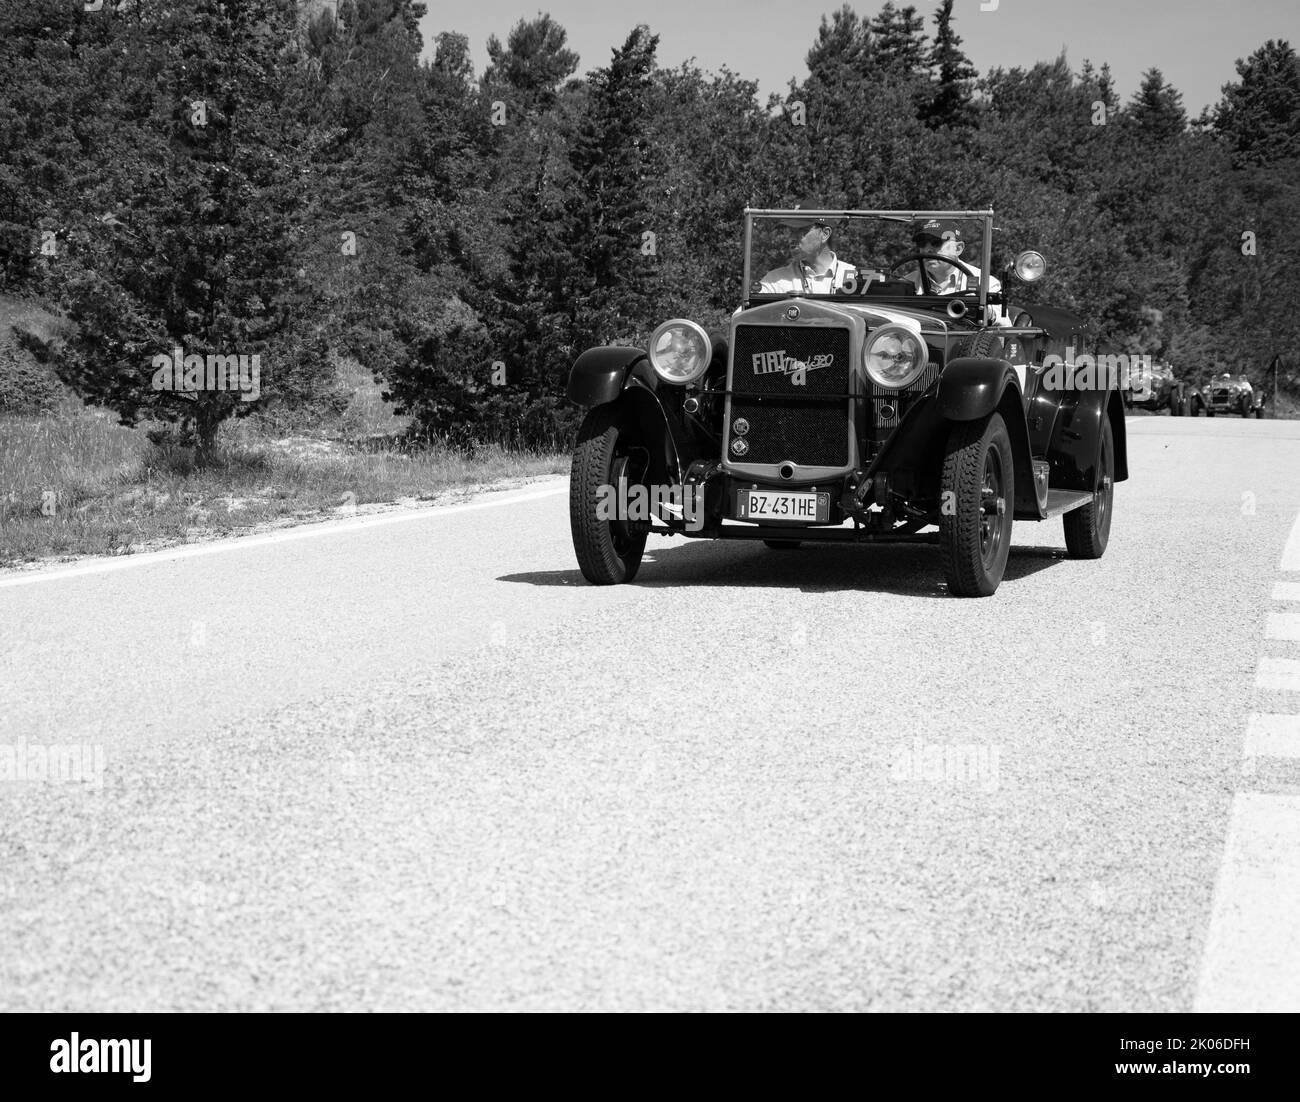 URBINO - ITALY - JUN 16 - 2022 : FIAT 520 1929 on an old racing car in rally Mille Miglia 2022 the famous italian historical race (1927-1957 Stock Photo